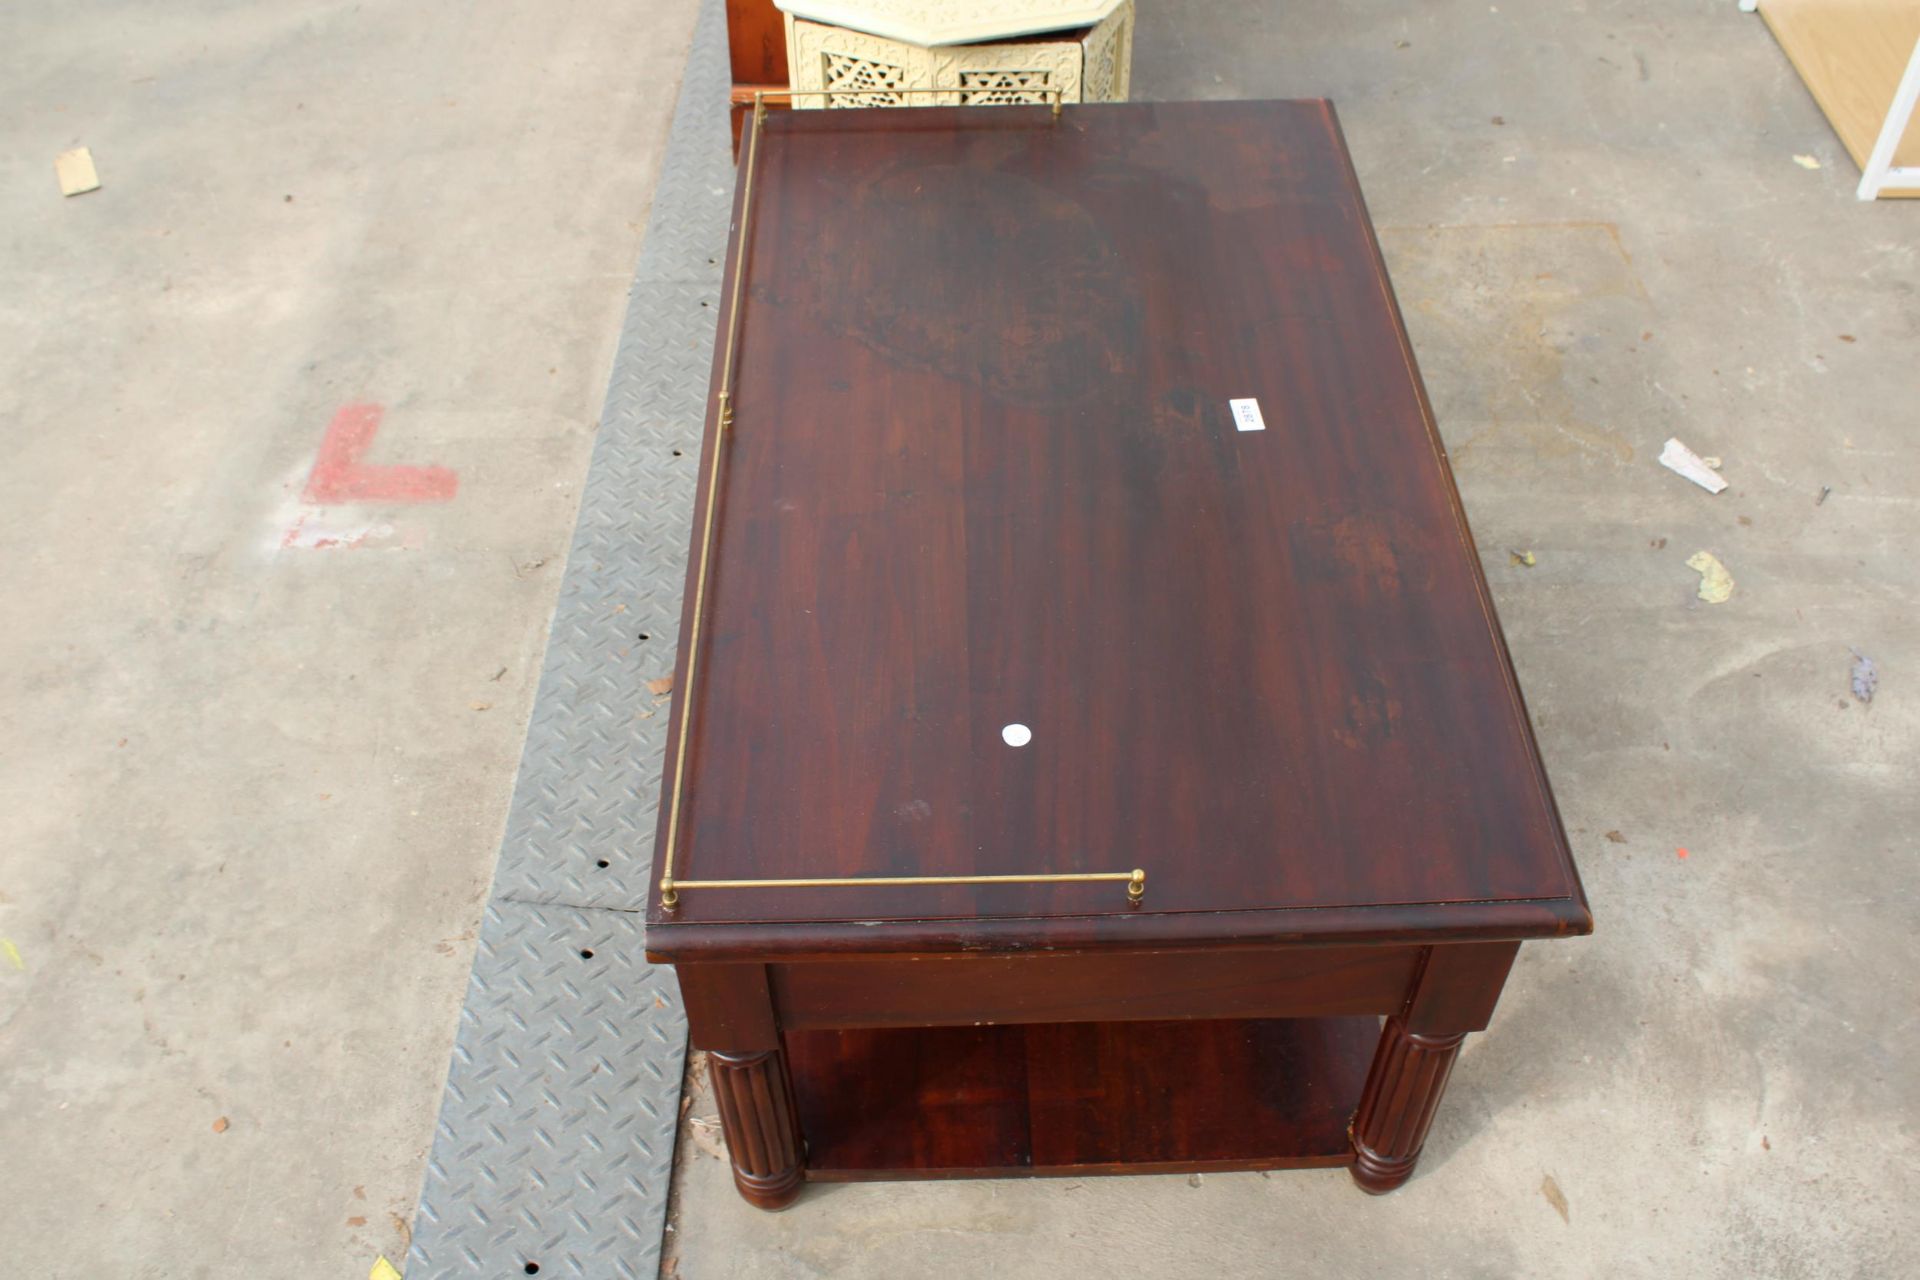 A MODERN HARDWOOD LOW SIDE TABLE WITH TWO DRAWERS AND BRASS GALLERY, 39" WIDE - Image 3 of 4